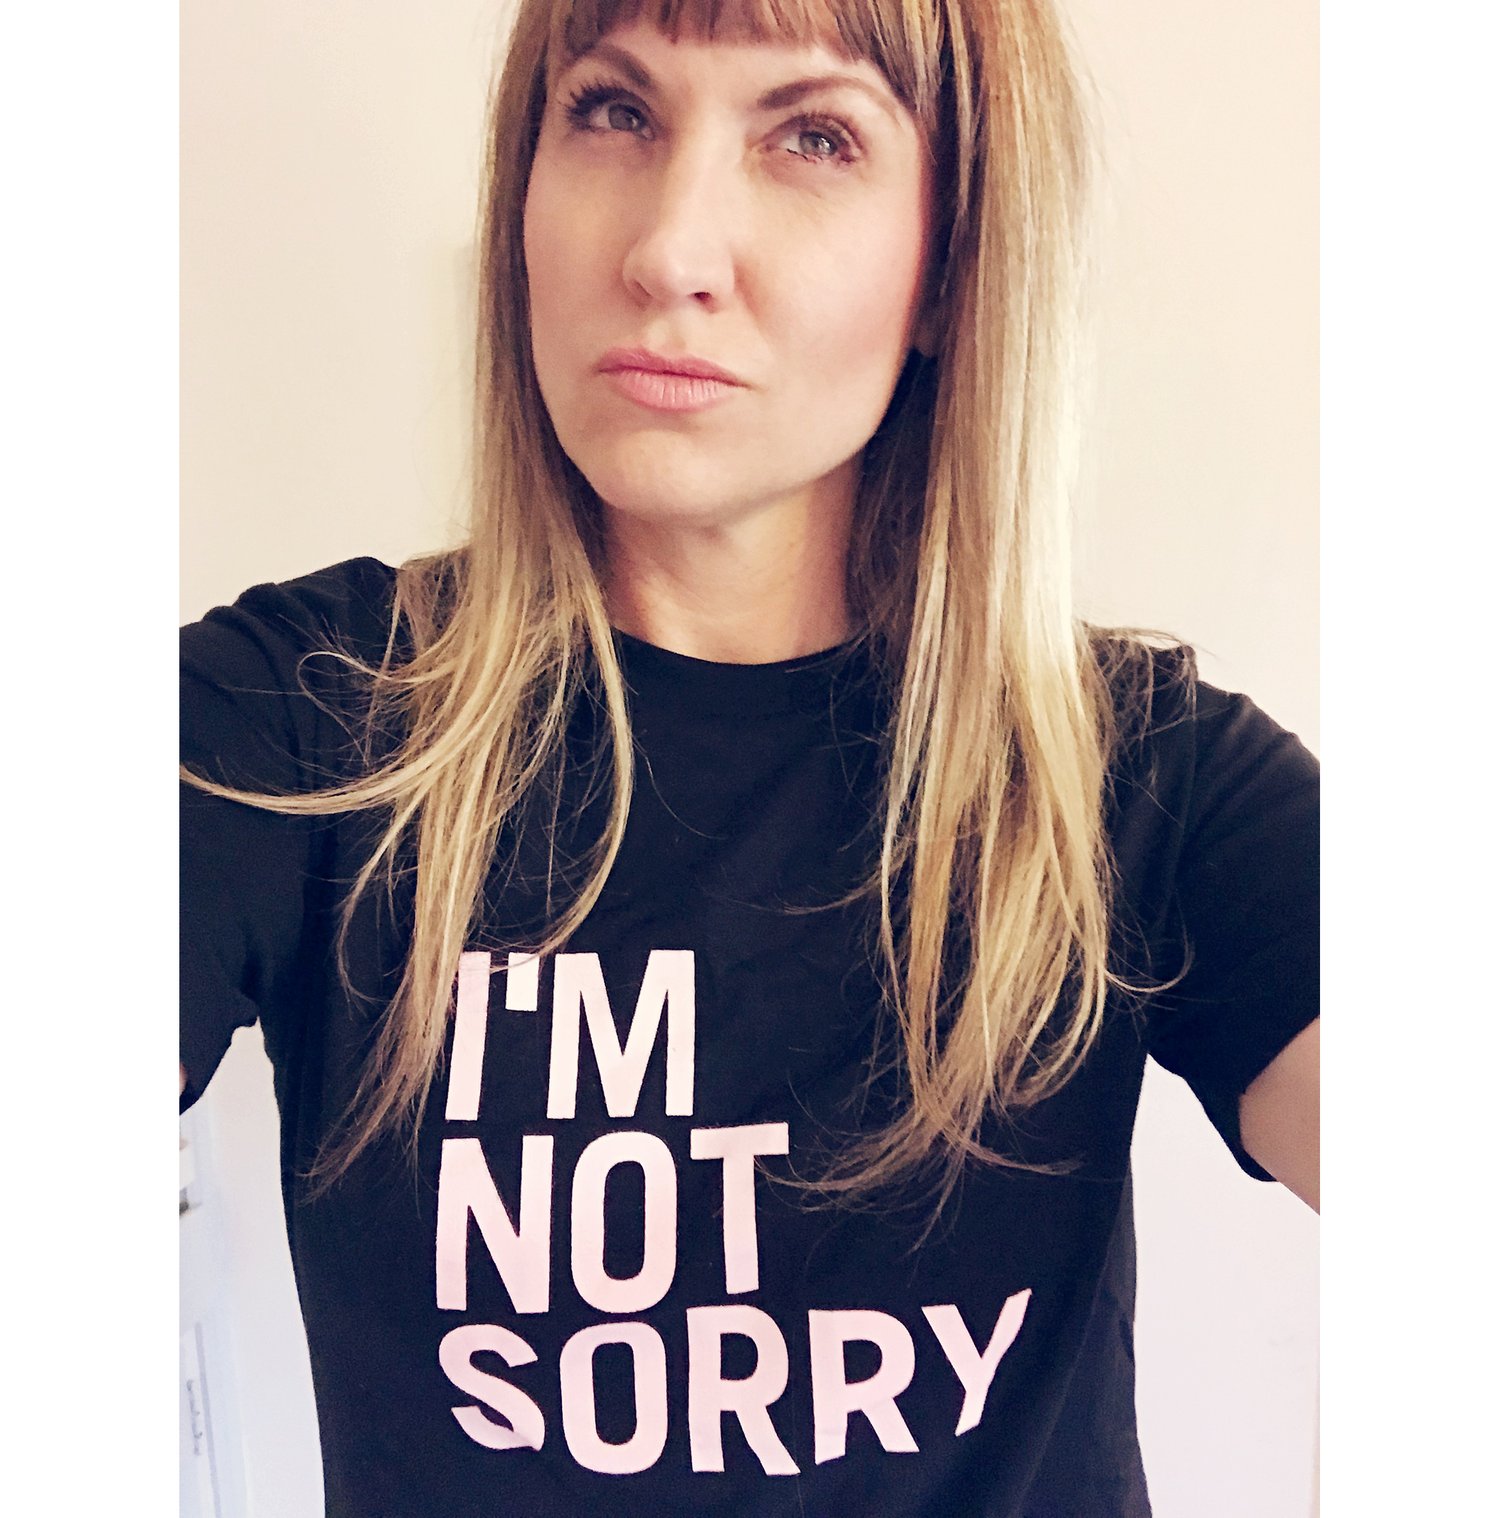 Image of I'M NOT SORRY t-shirt for adults, pink writing on black tee